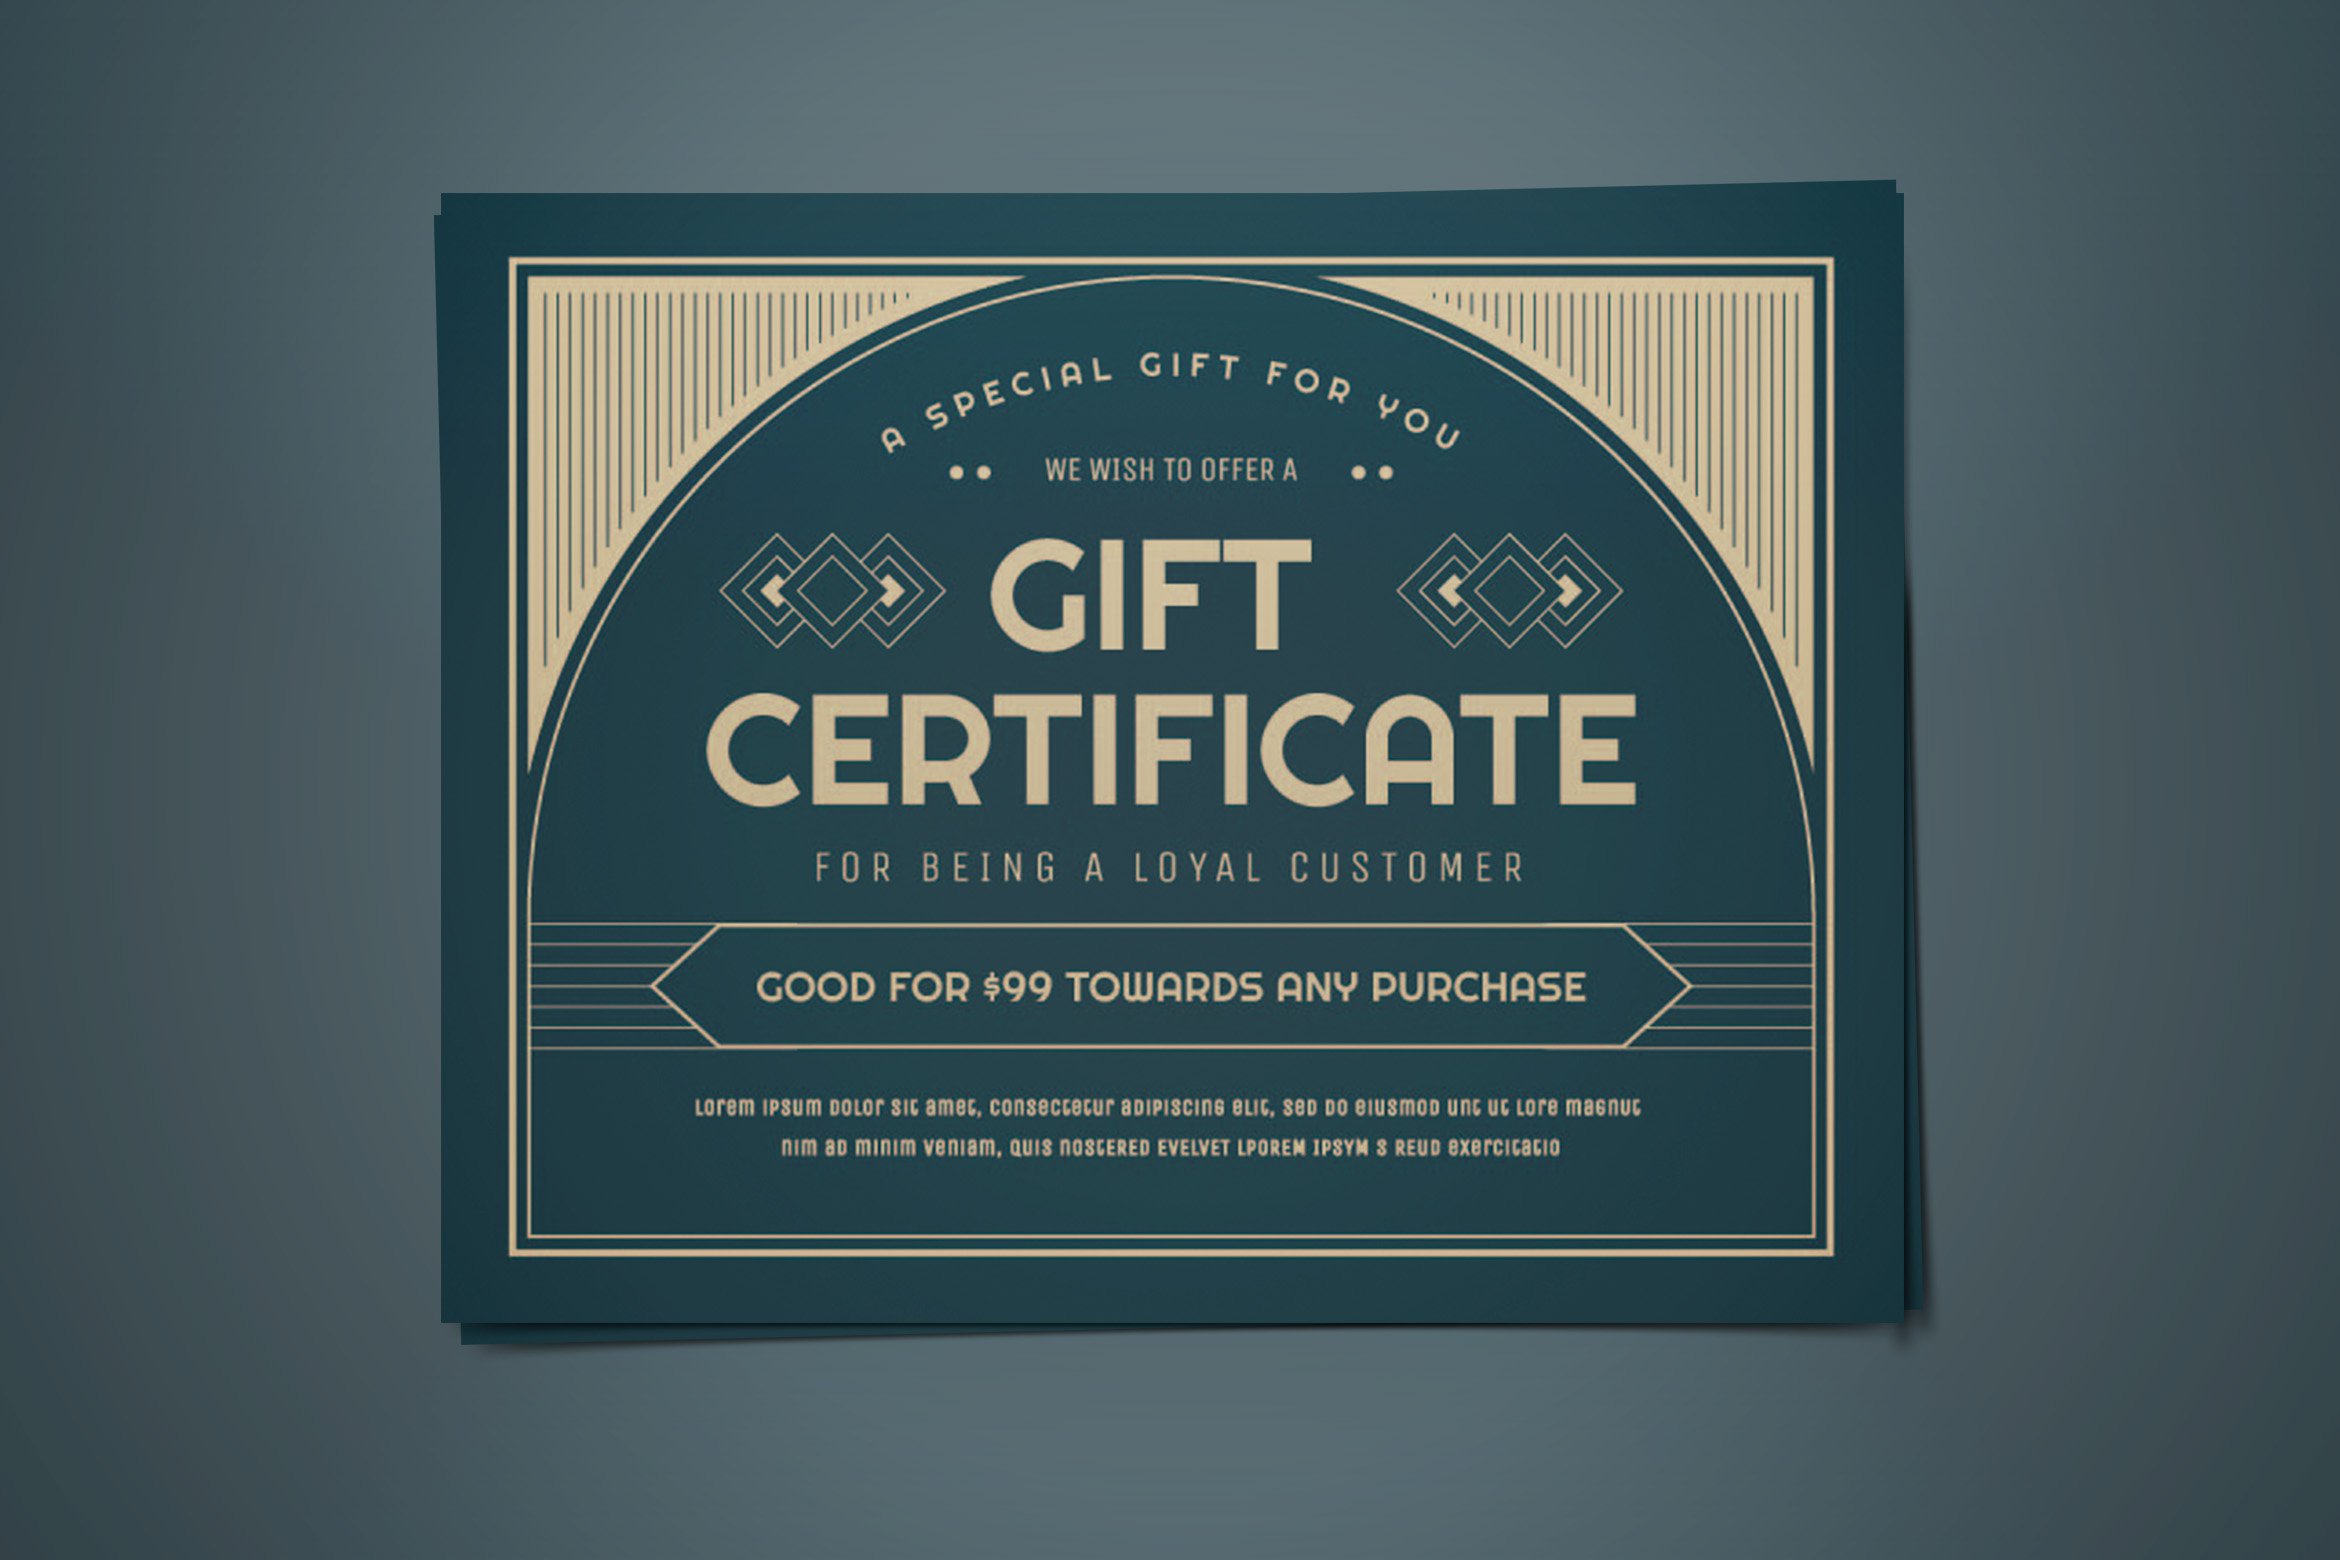 Gift Certificate preview image.